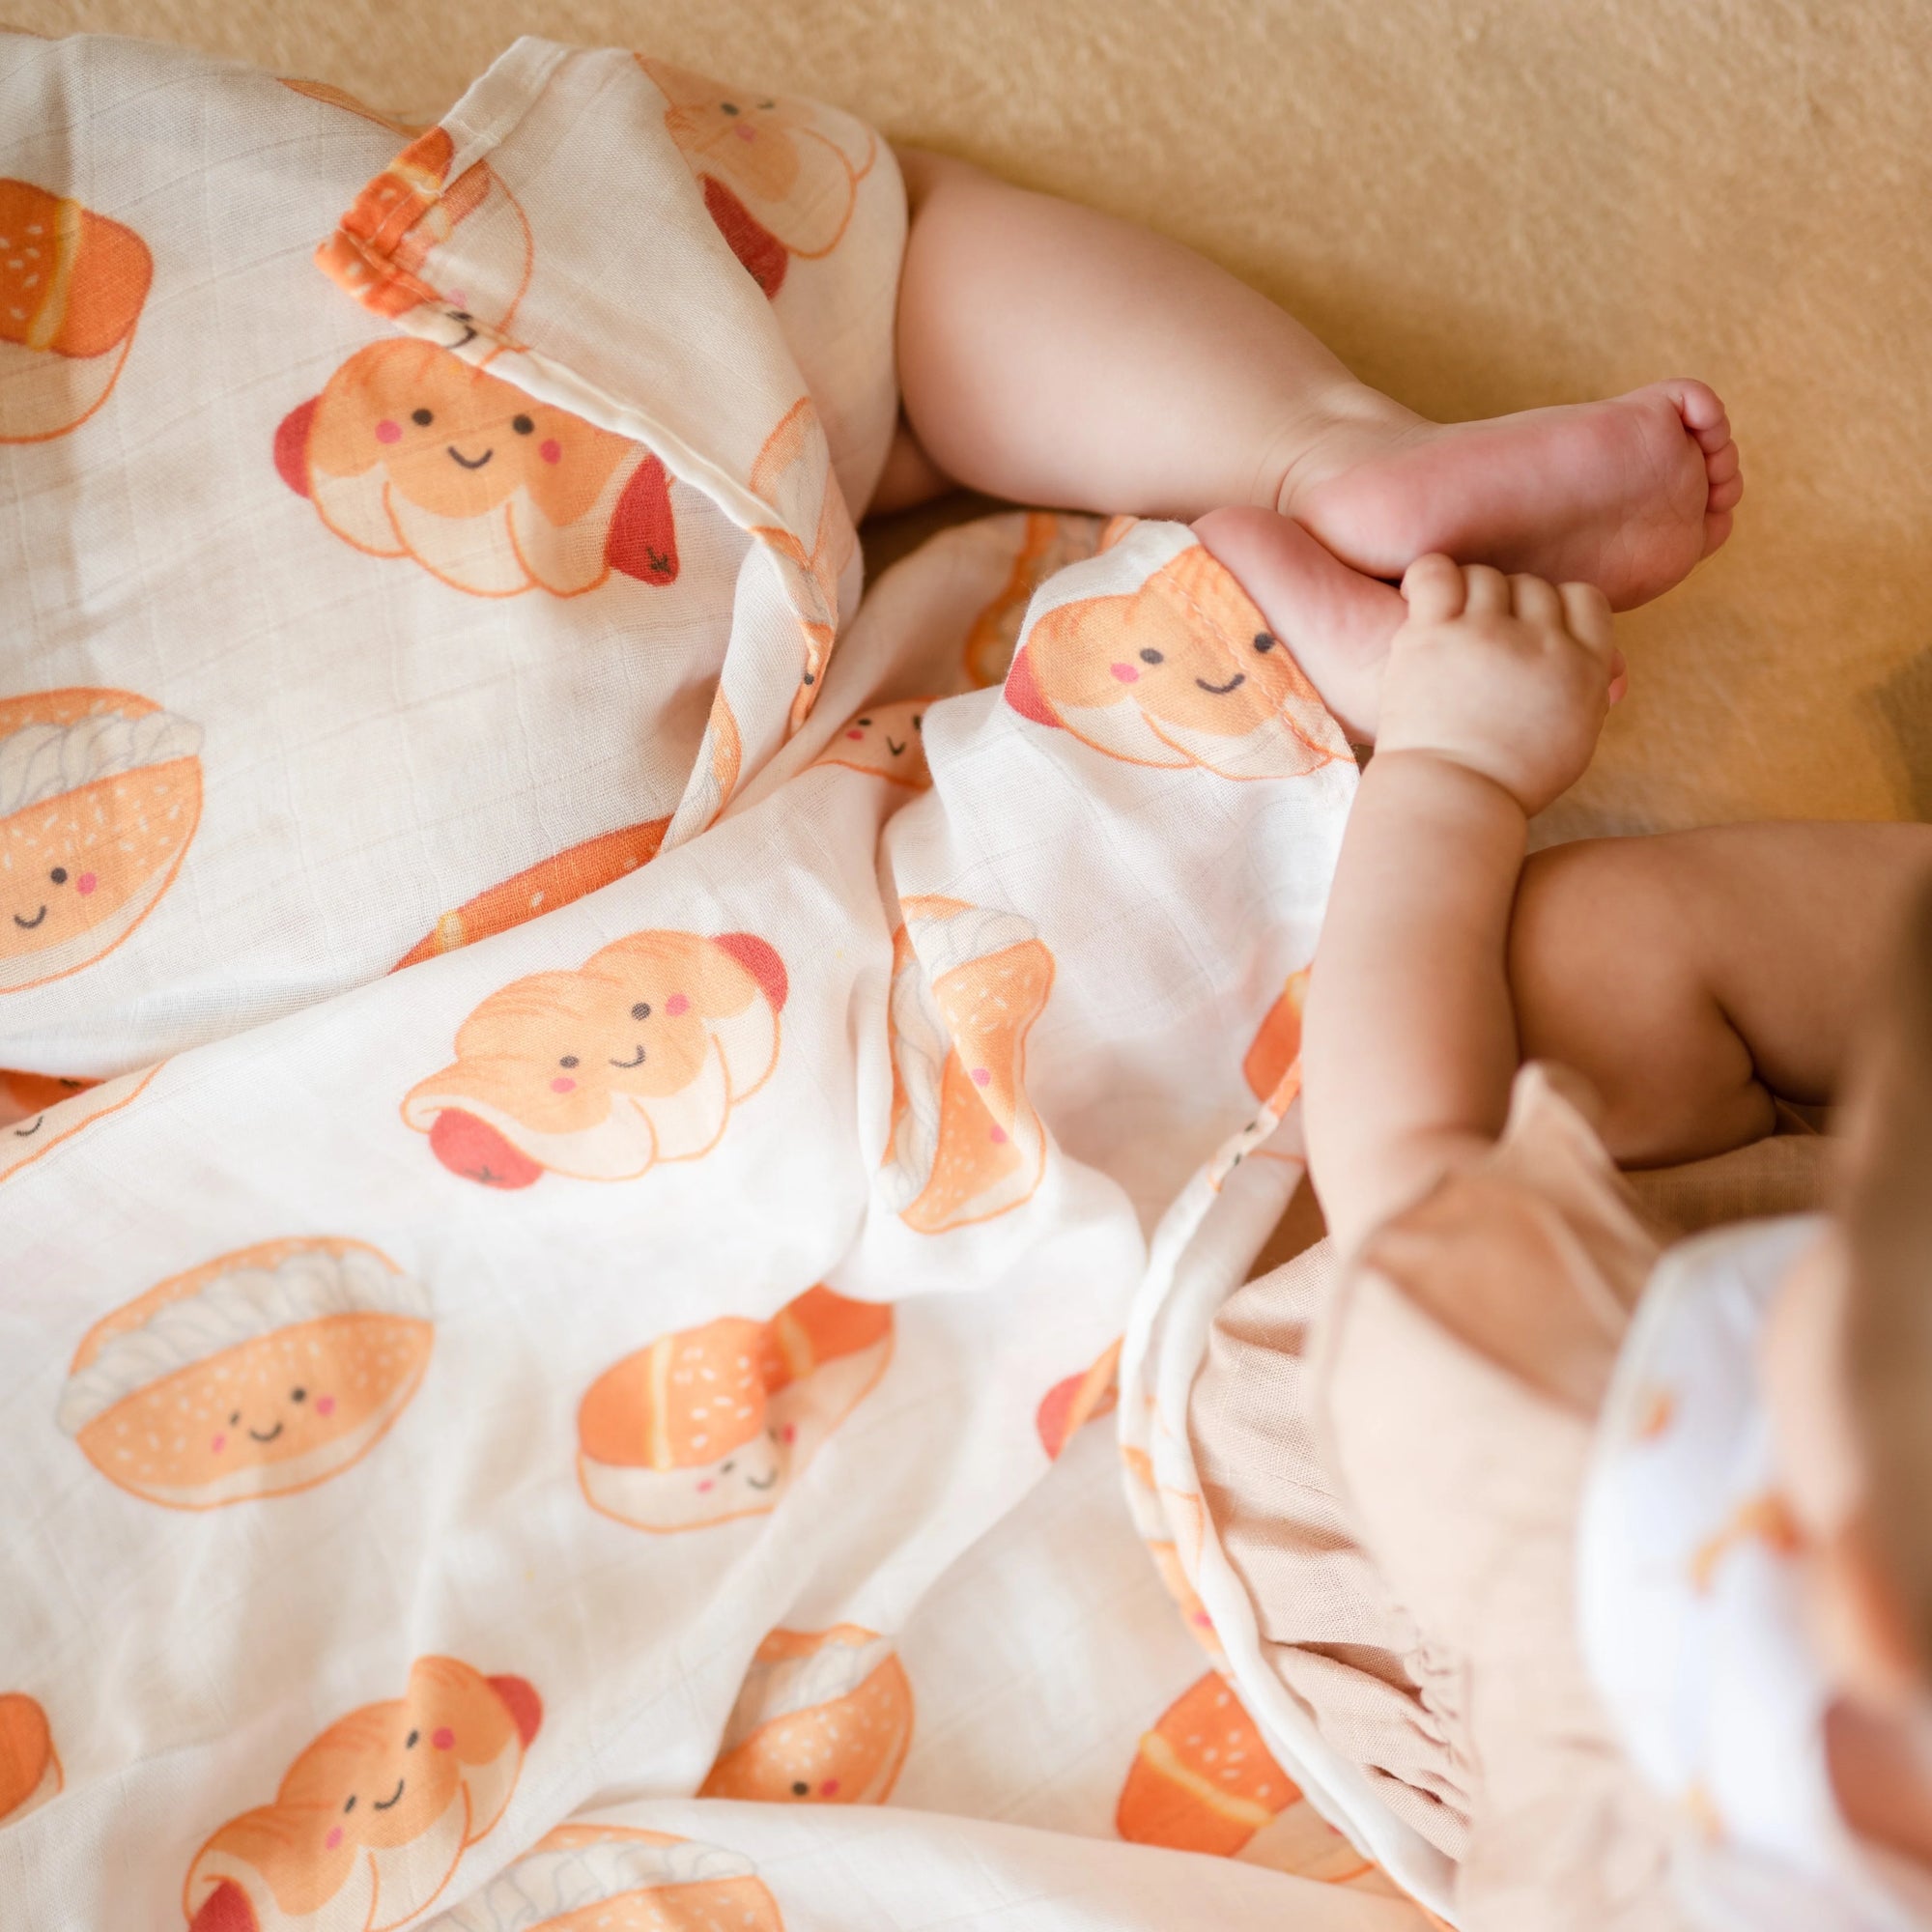 Muslin Cloth for Babies - All You Need to Know 